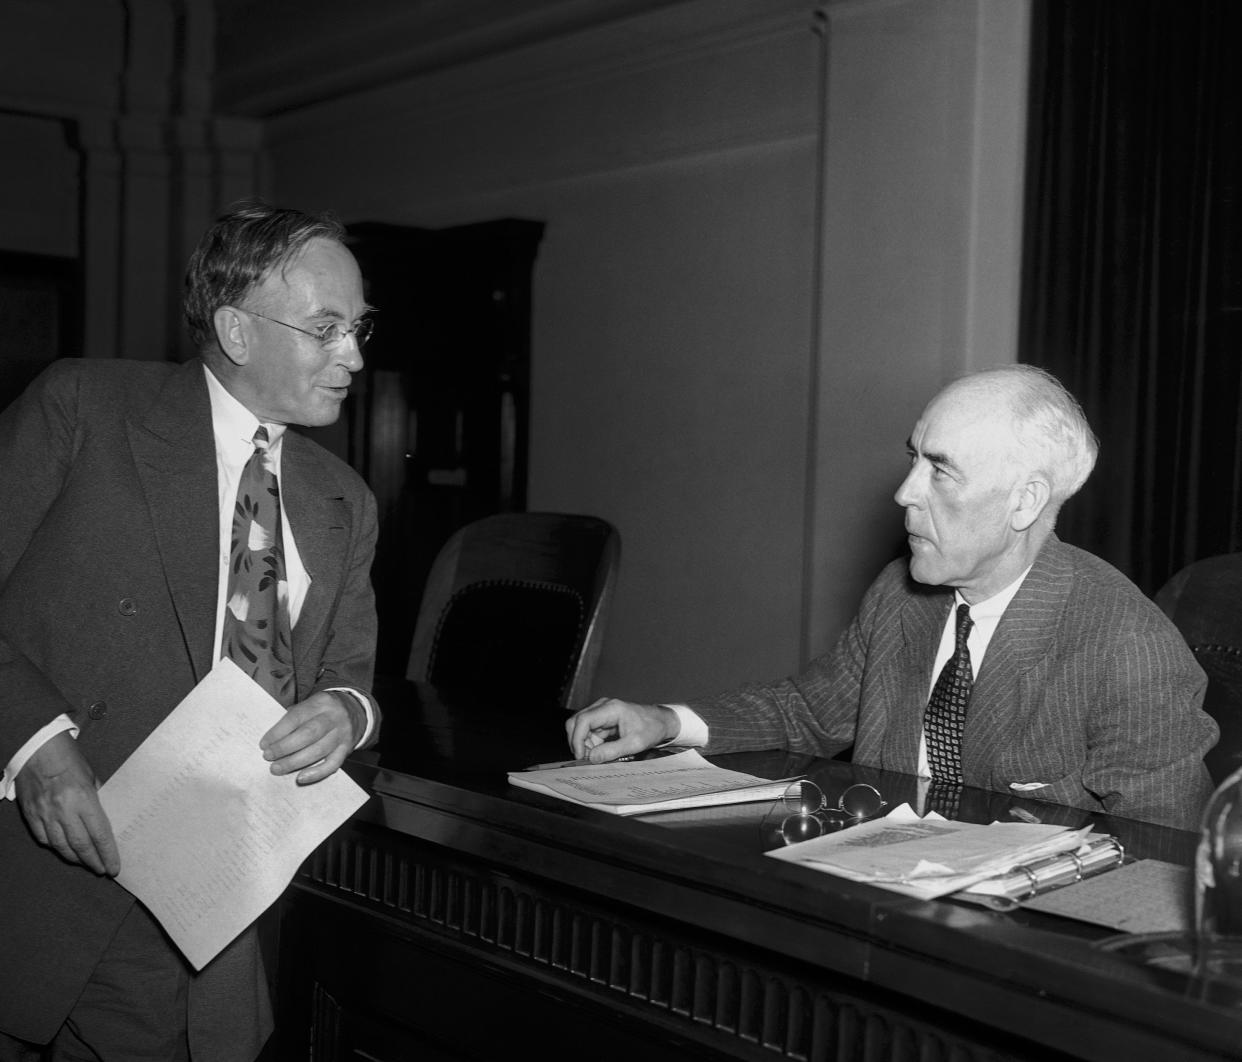 Waddill Catchings (left) of New York told the Securities Commission in Washington on June 2, 1937 that the Goldman Sachs trading corporation lost $289,566,330 of its $326,194,401 capital from 1928 to 1932. He asserted the loss was in line with the losses of other investors in the Wall Street crash of 1929. Catchings was head of the corporation. Commissioner Robert E. Healy of the Securities Exchange Commission is on the right. (AP Photo/Herbert K. White)